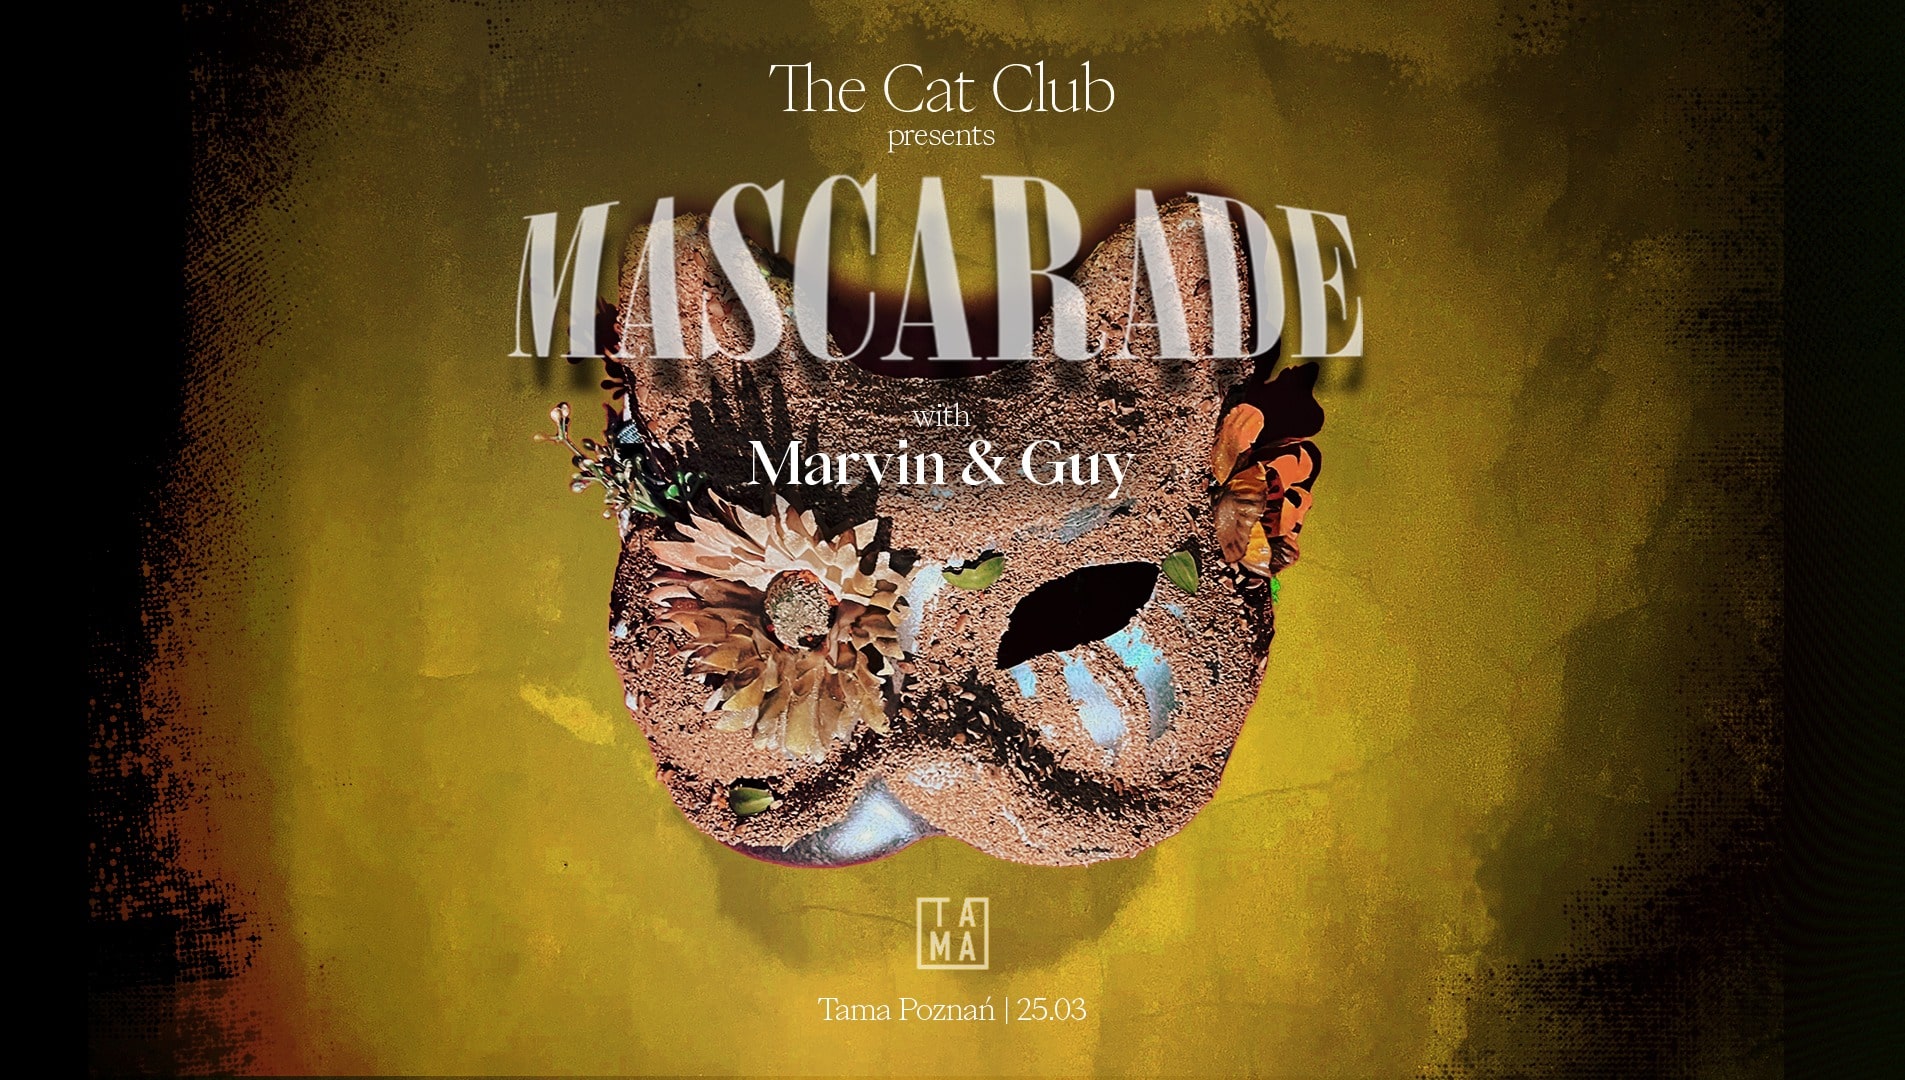 The Cat Club pres. Mascarade with Marvin & Guy | Tama